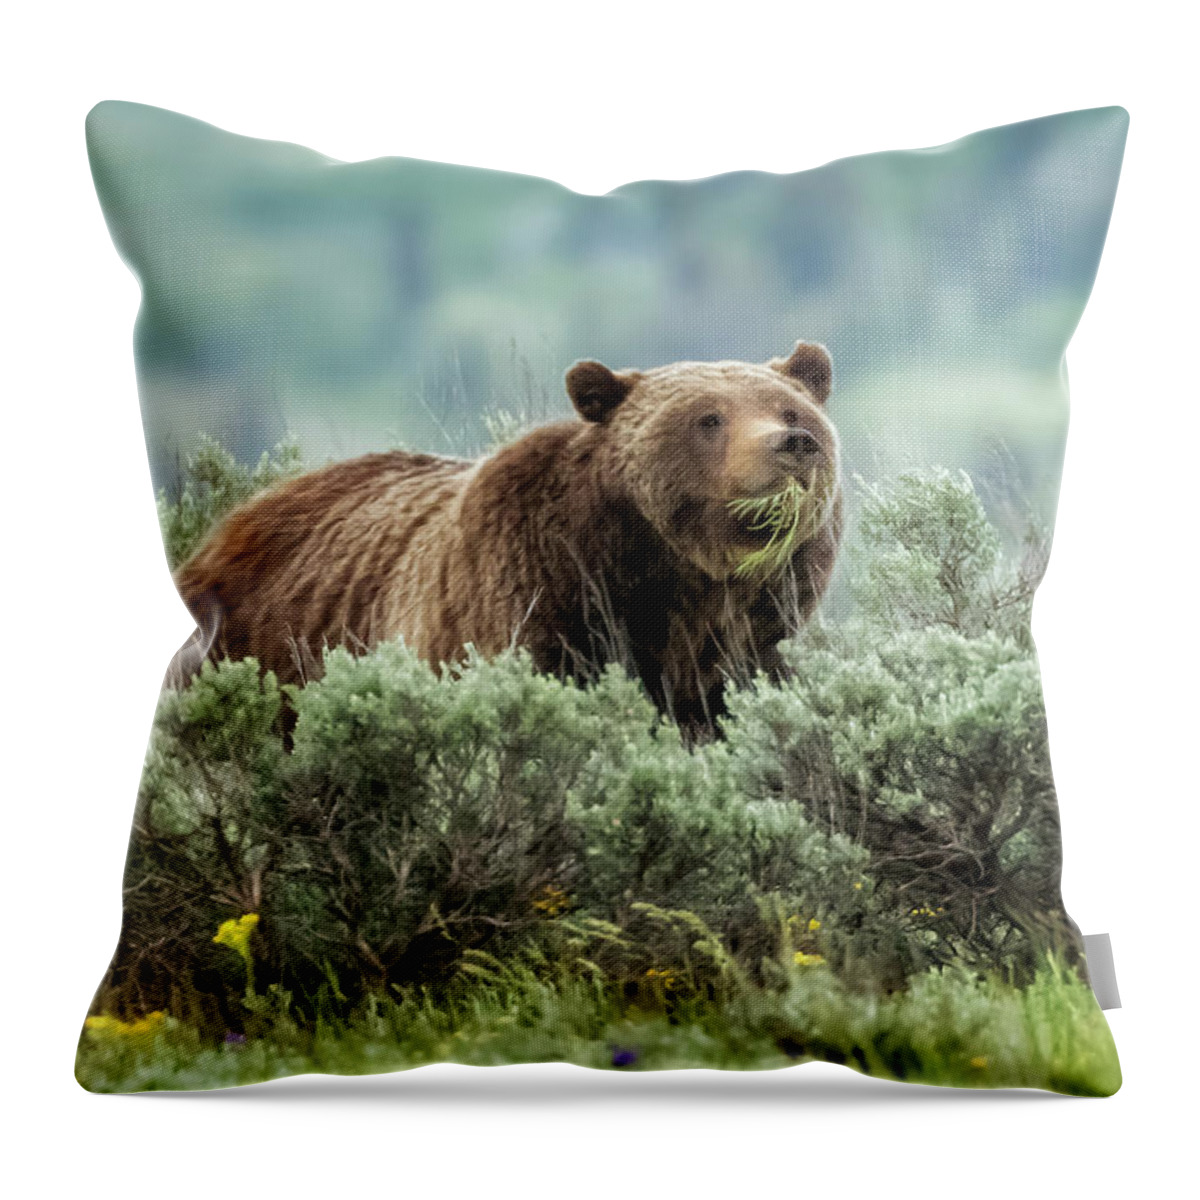 Grizzly Throw Pillow featuring the photograph Grizzly 399 Eating Grass by Belinda Greb